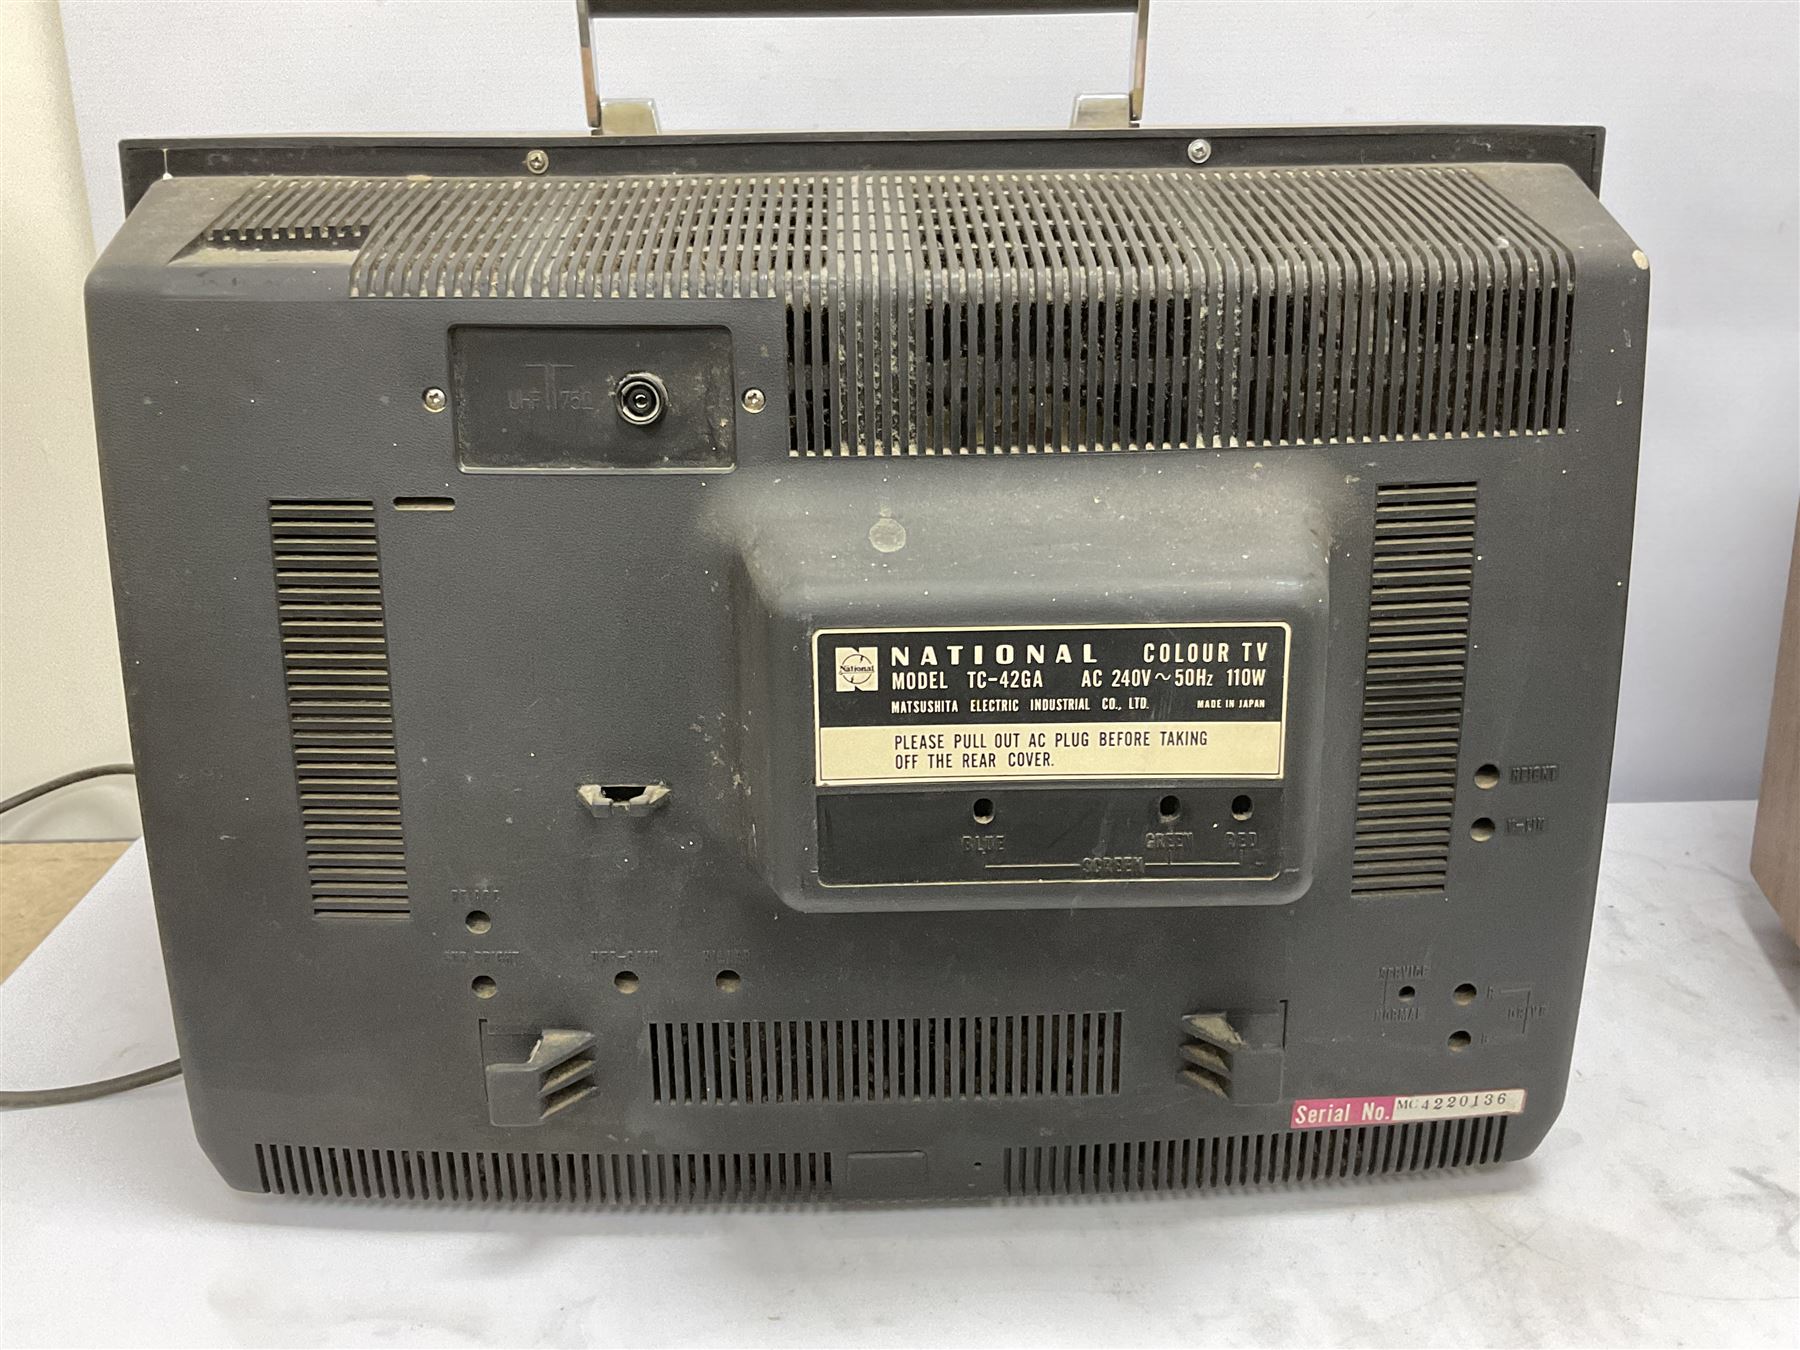 1970s National Type TC-42GA colour television by Matsushita Electric Industrial Co - Image 9 of 12